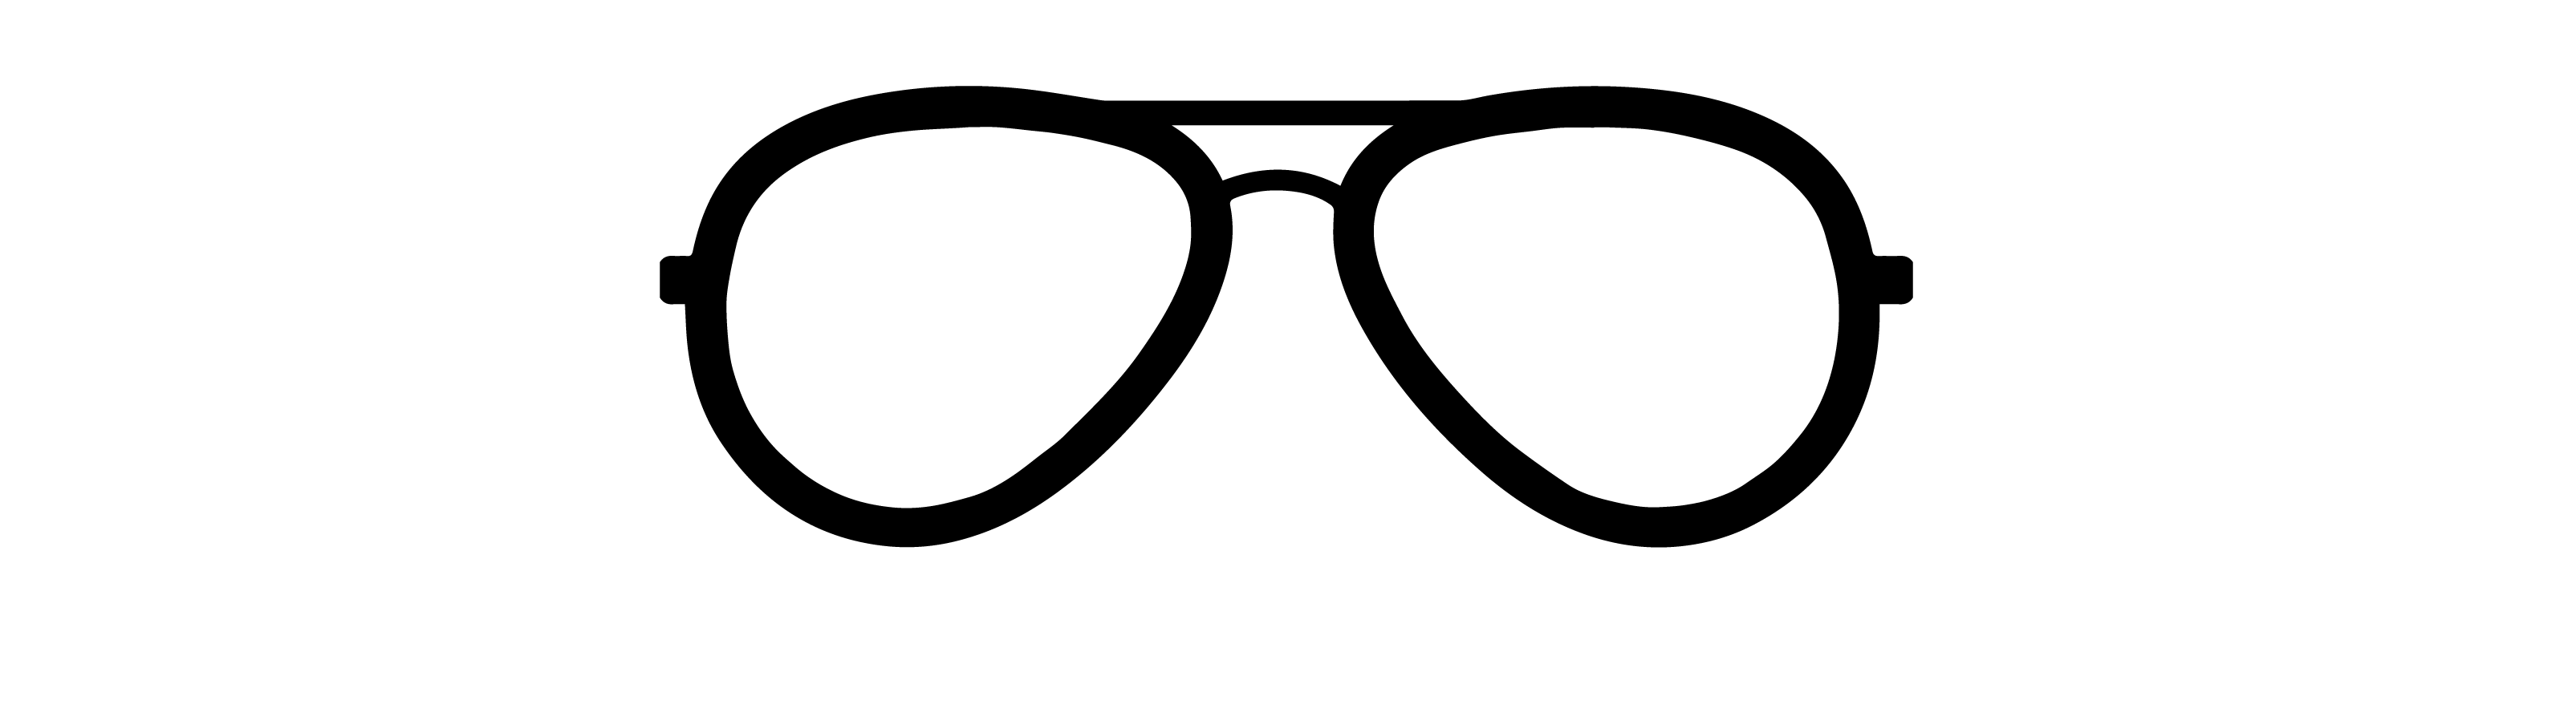 Aviator Sunglasses Clipart Great PowerPoint ClipArt For Presentations ...